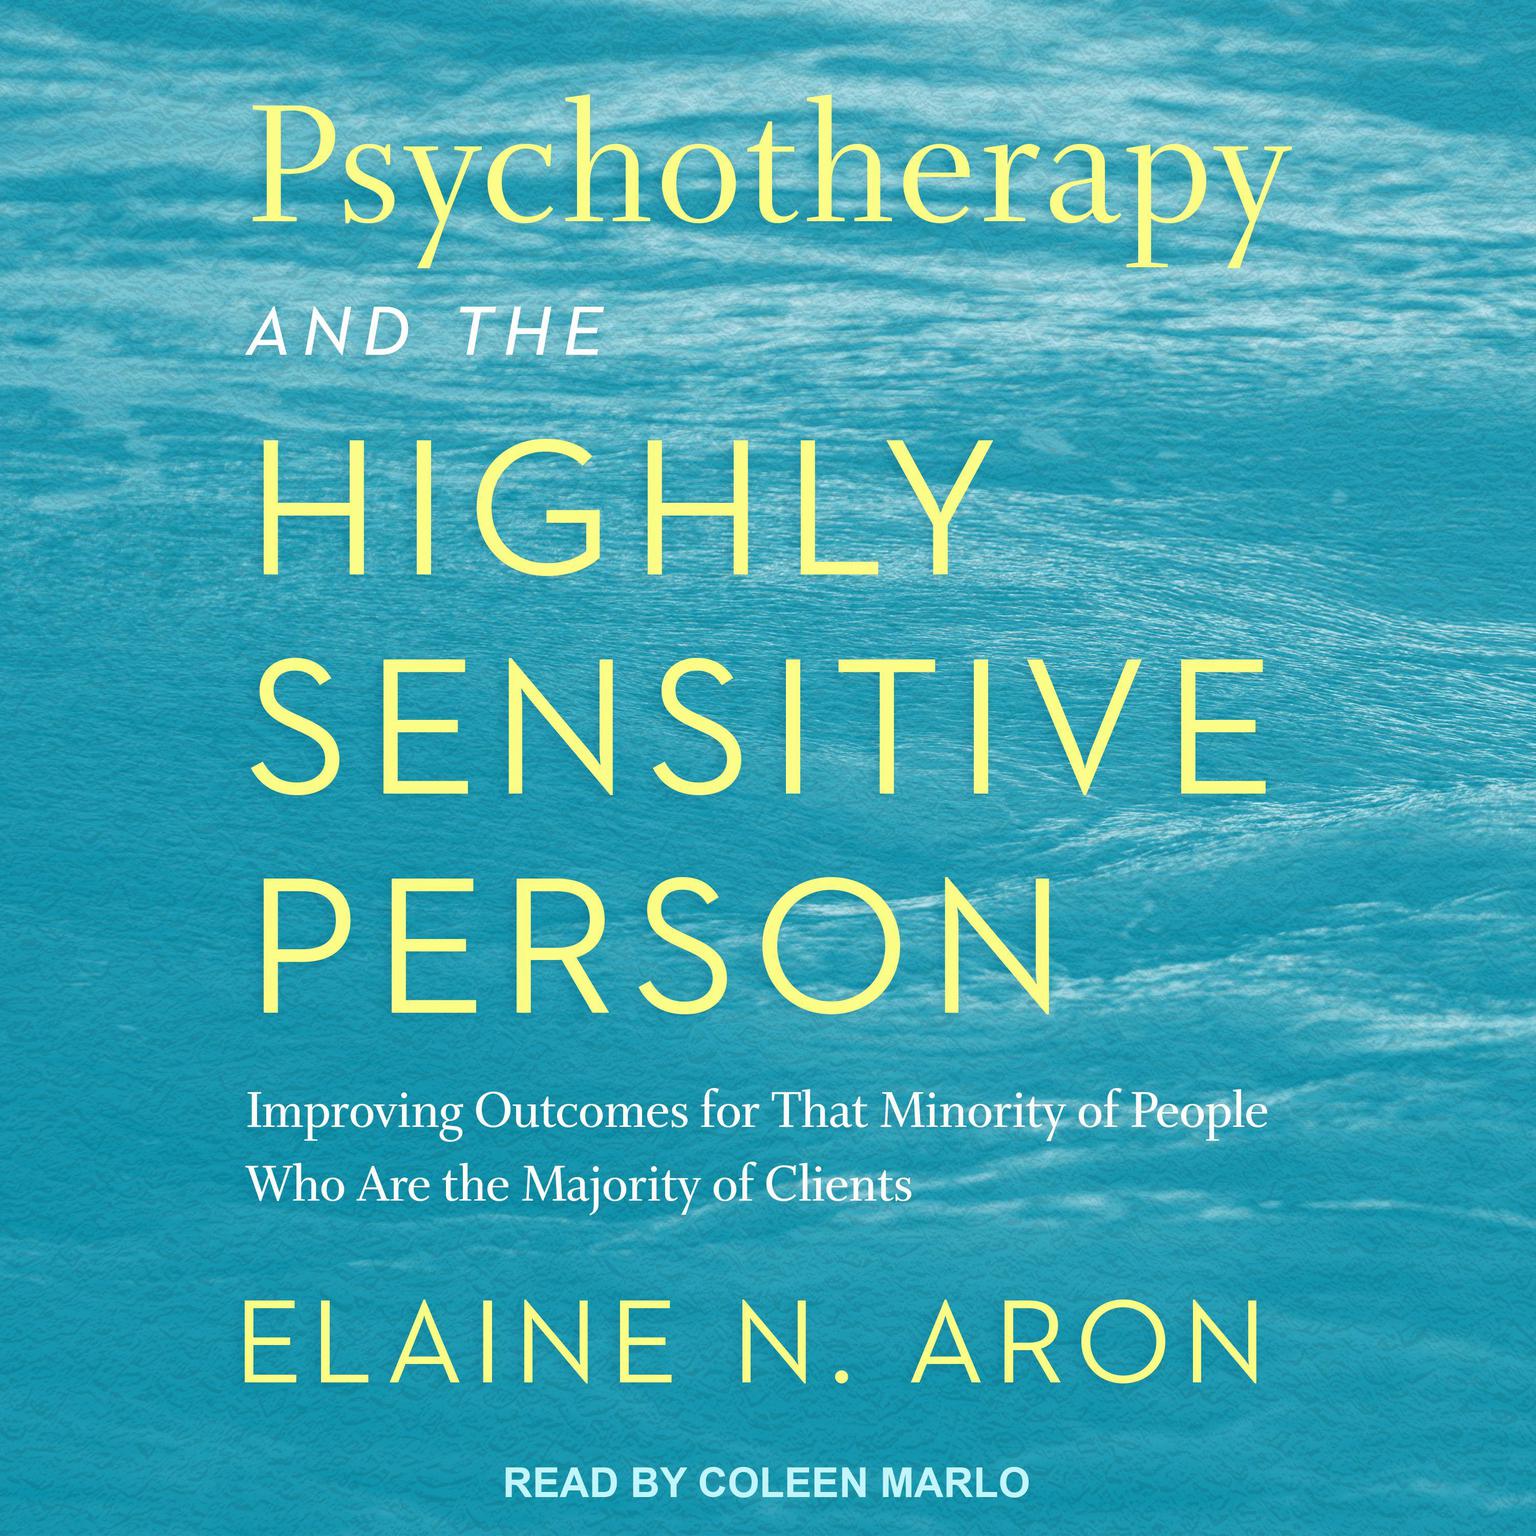 Psychotherapy and the Highly Sensitive Person: Improving Outcomes for That Minority of People Who Are the Majority of Clients Audiobook, by Elaine N. Aron